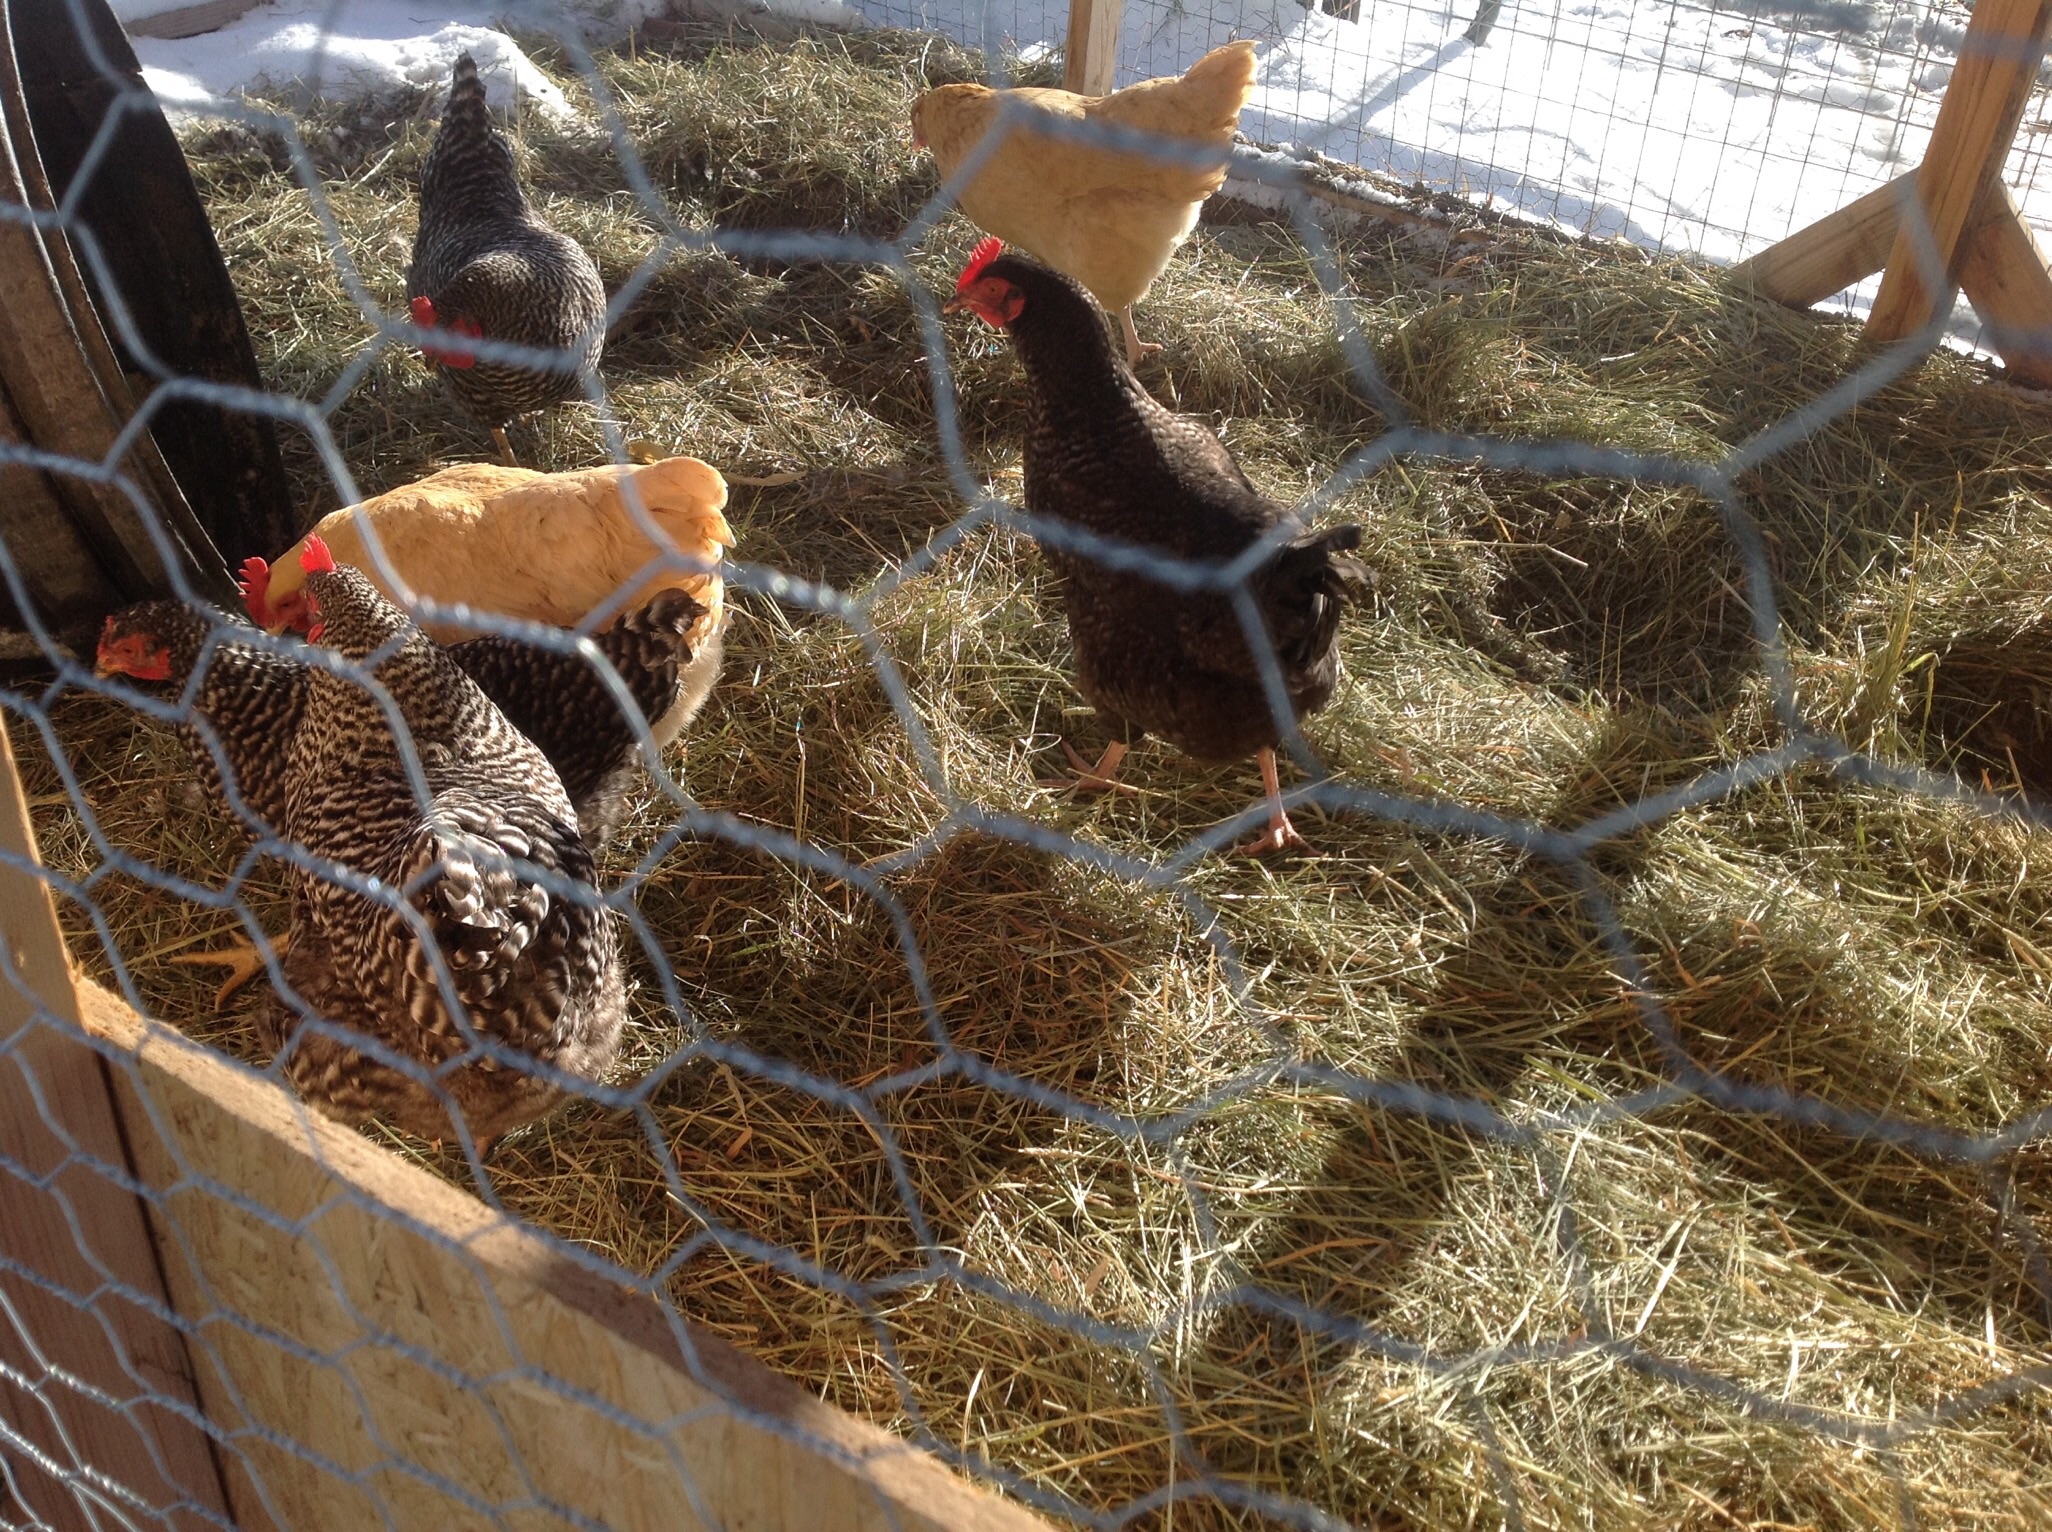 Live in Montana. We've had a week of high temps in the teens. Today is a heat wave and up into the high 20s. The girls are really glad to get out of the coop for a couple of hours.